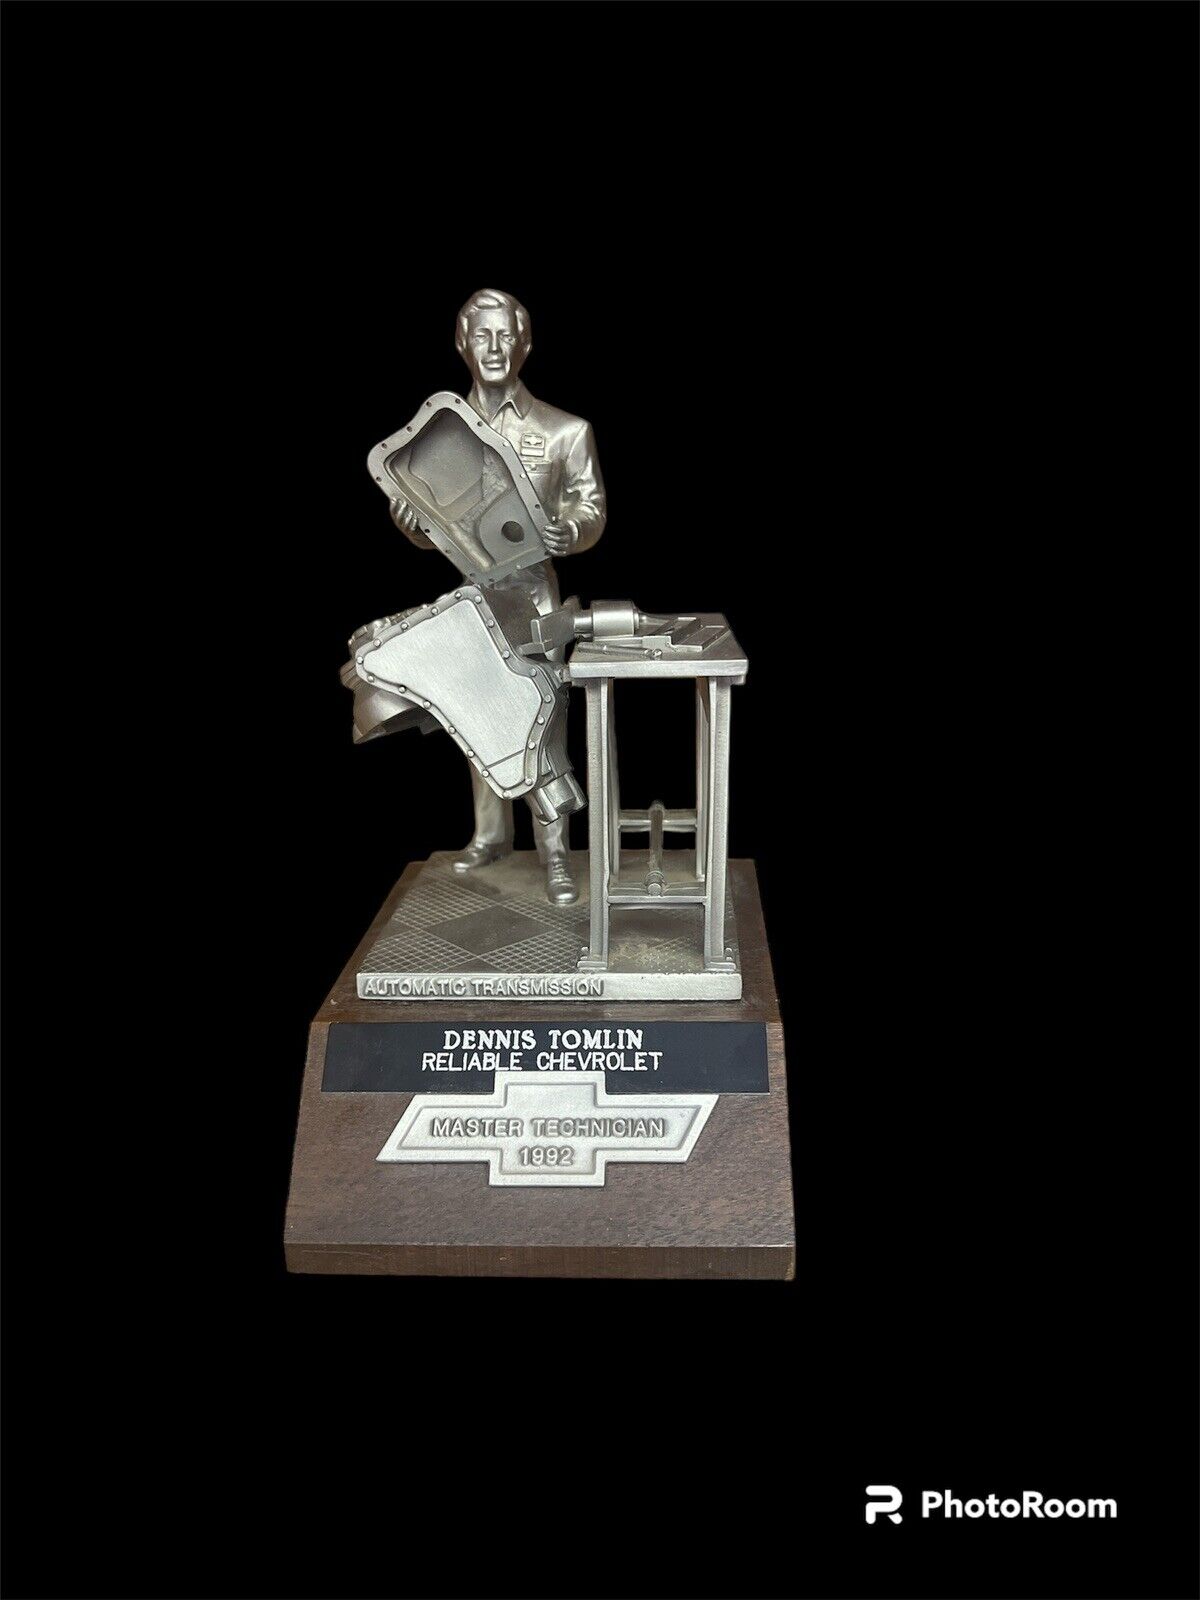 Chevrolet 1992 CCT Master Technician Automatic Transmission Pewter Figure Award